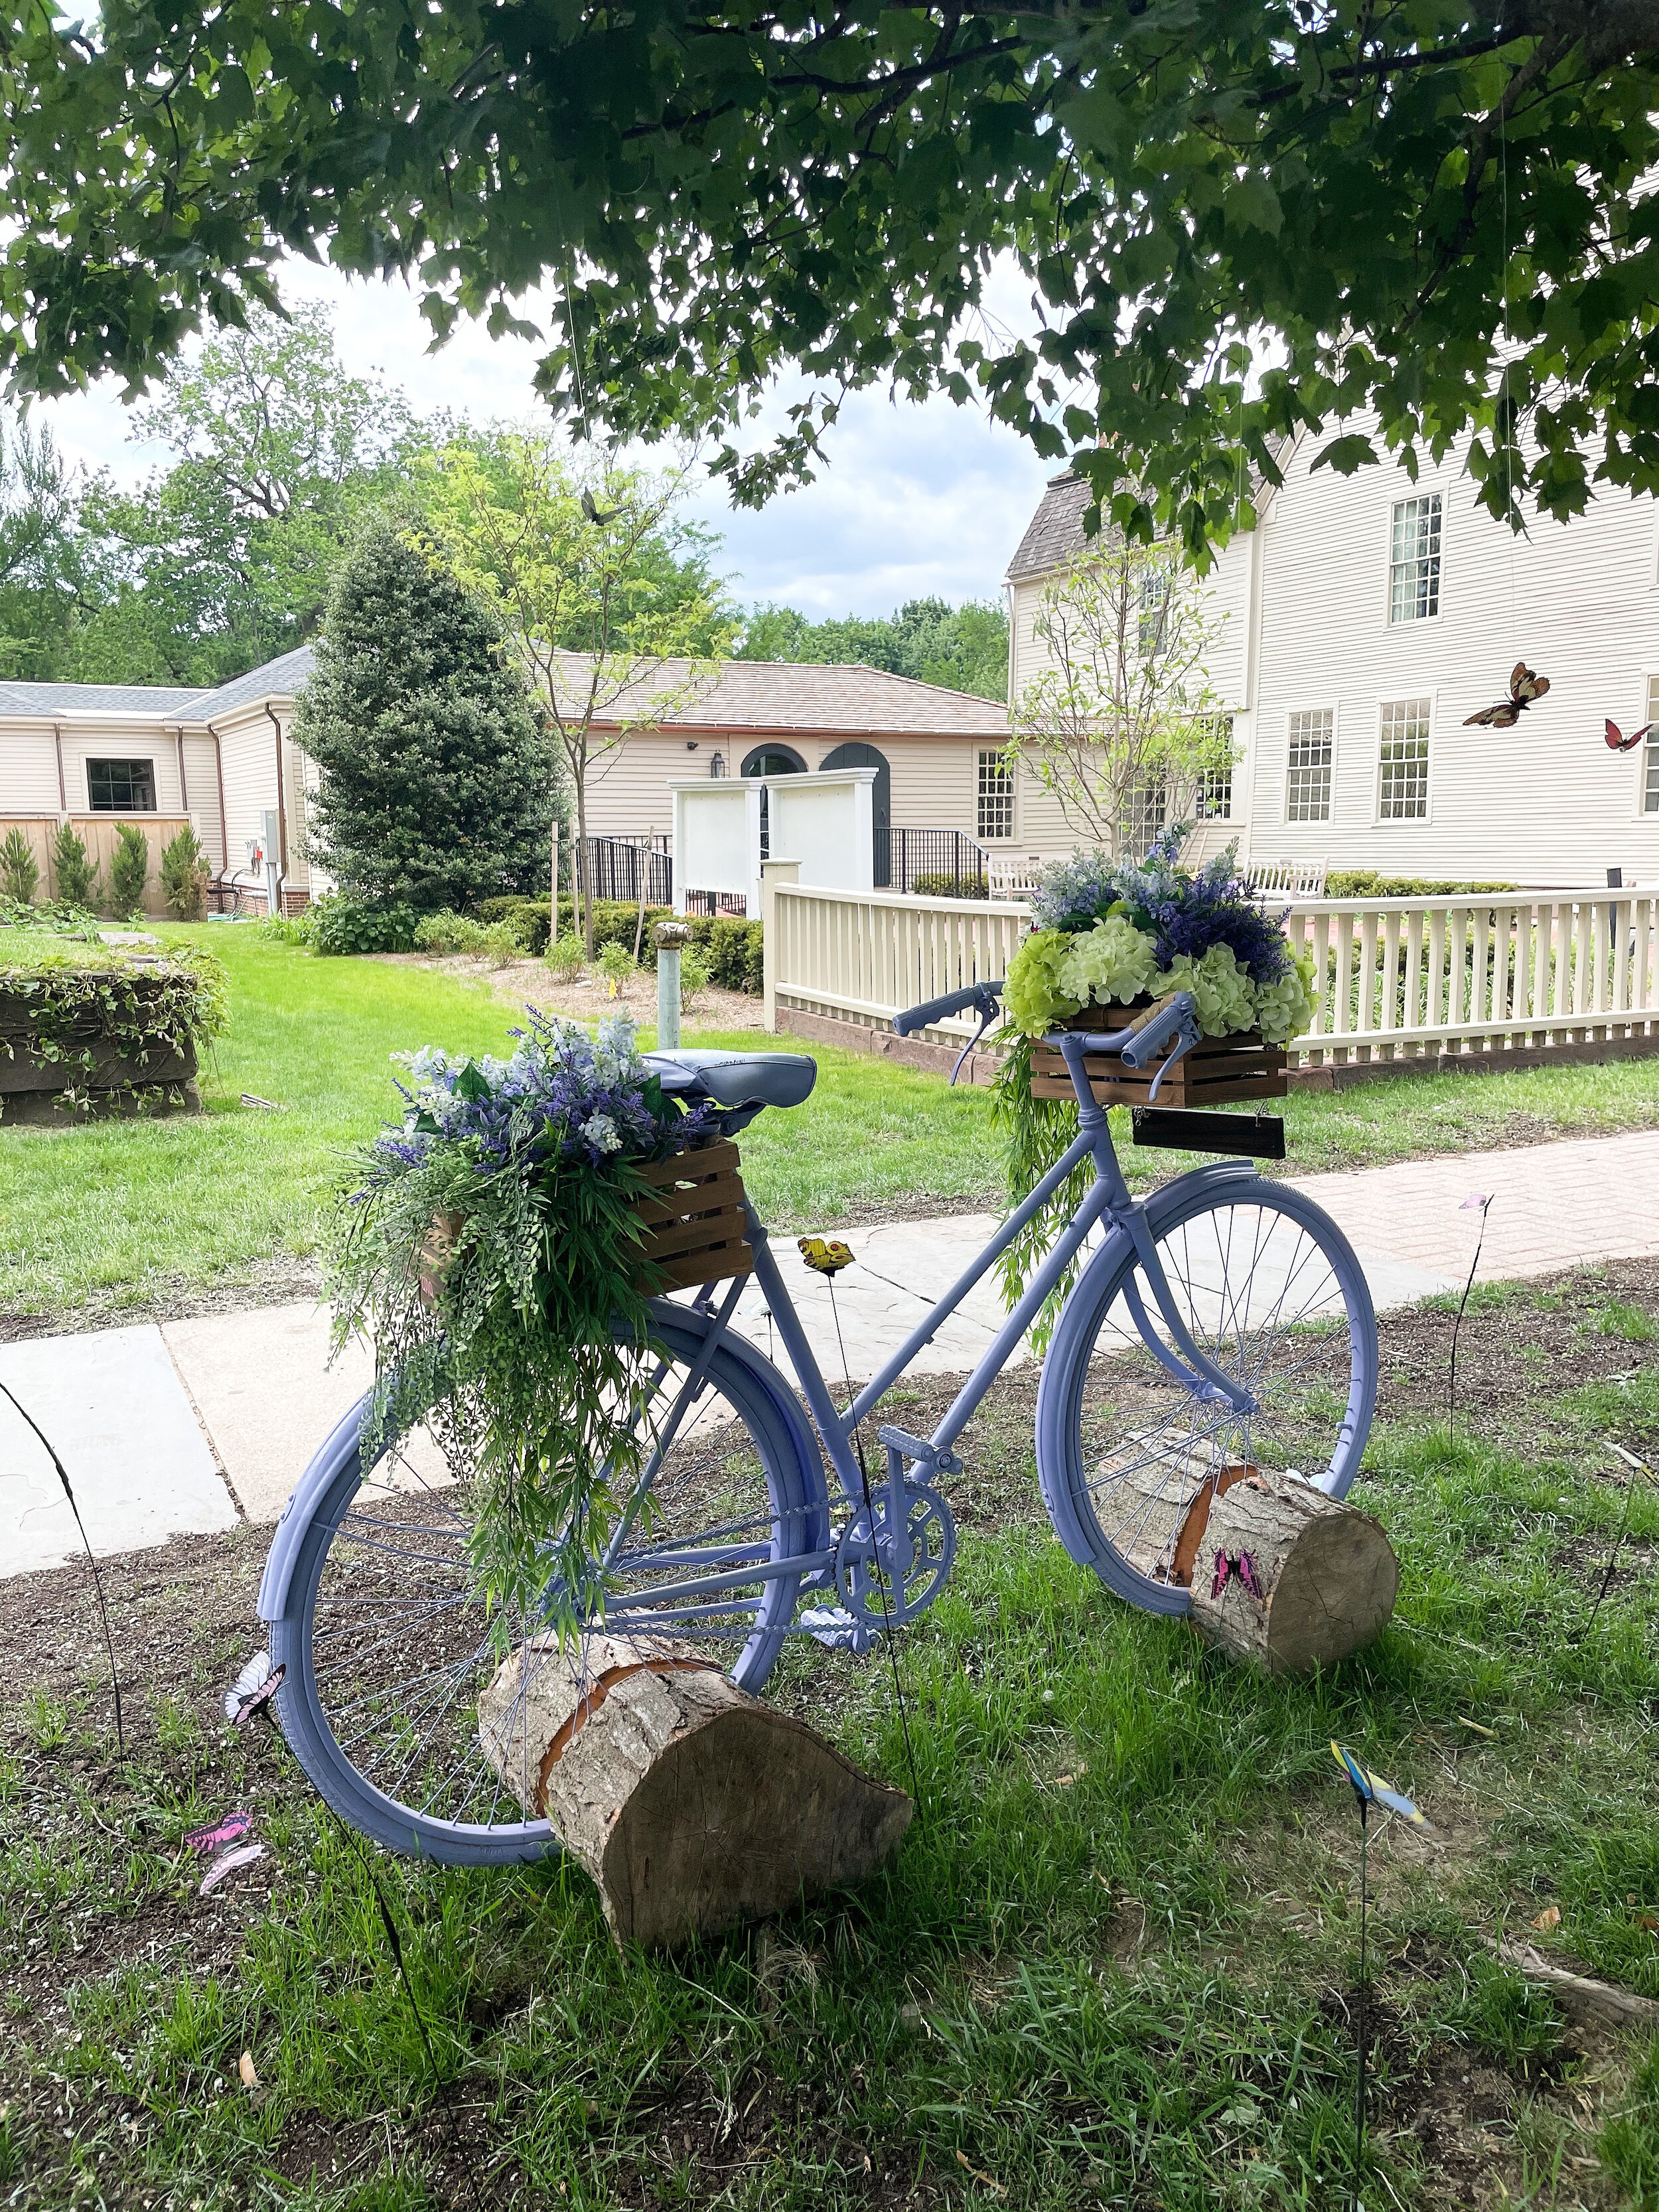 20 DIY Ideas to Recycle Bikes for Blooming Yard Decorations | Yard decor,  Bicycle painting, Bicycle decor